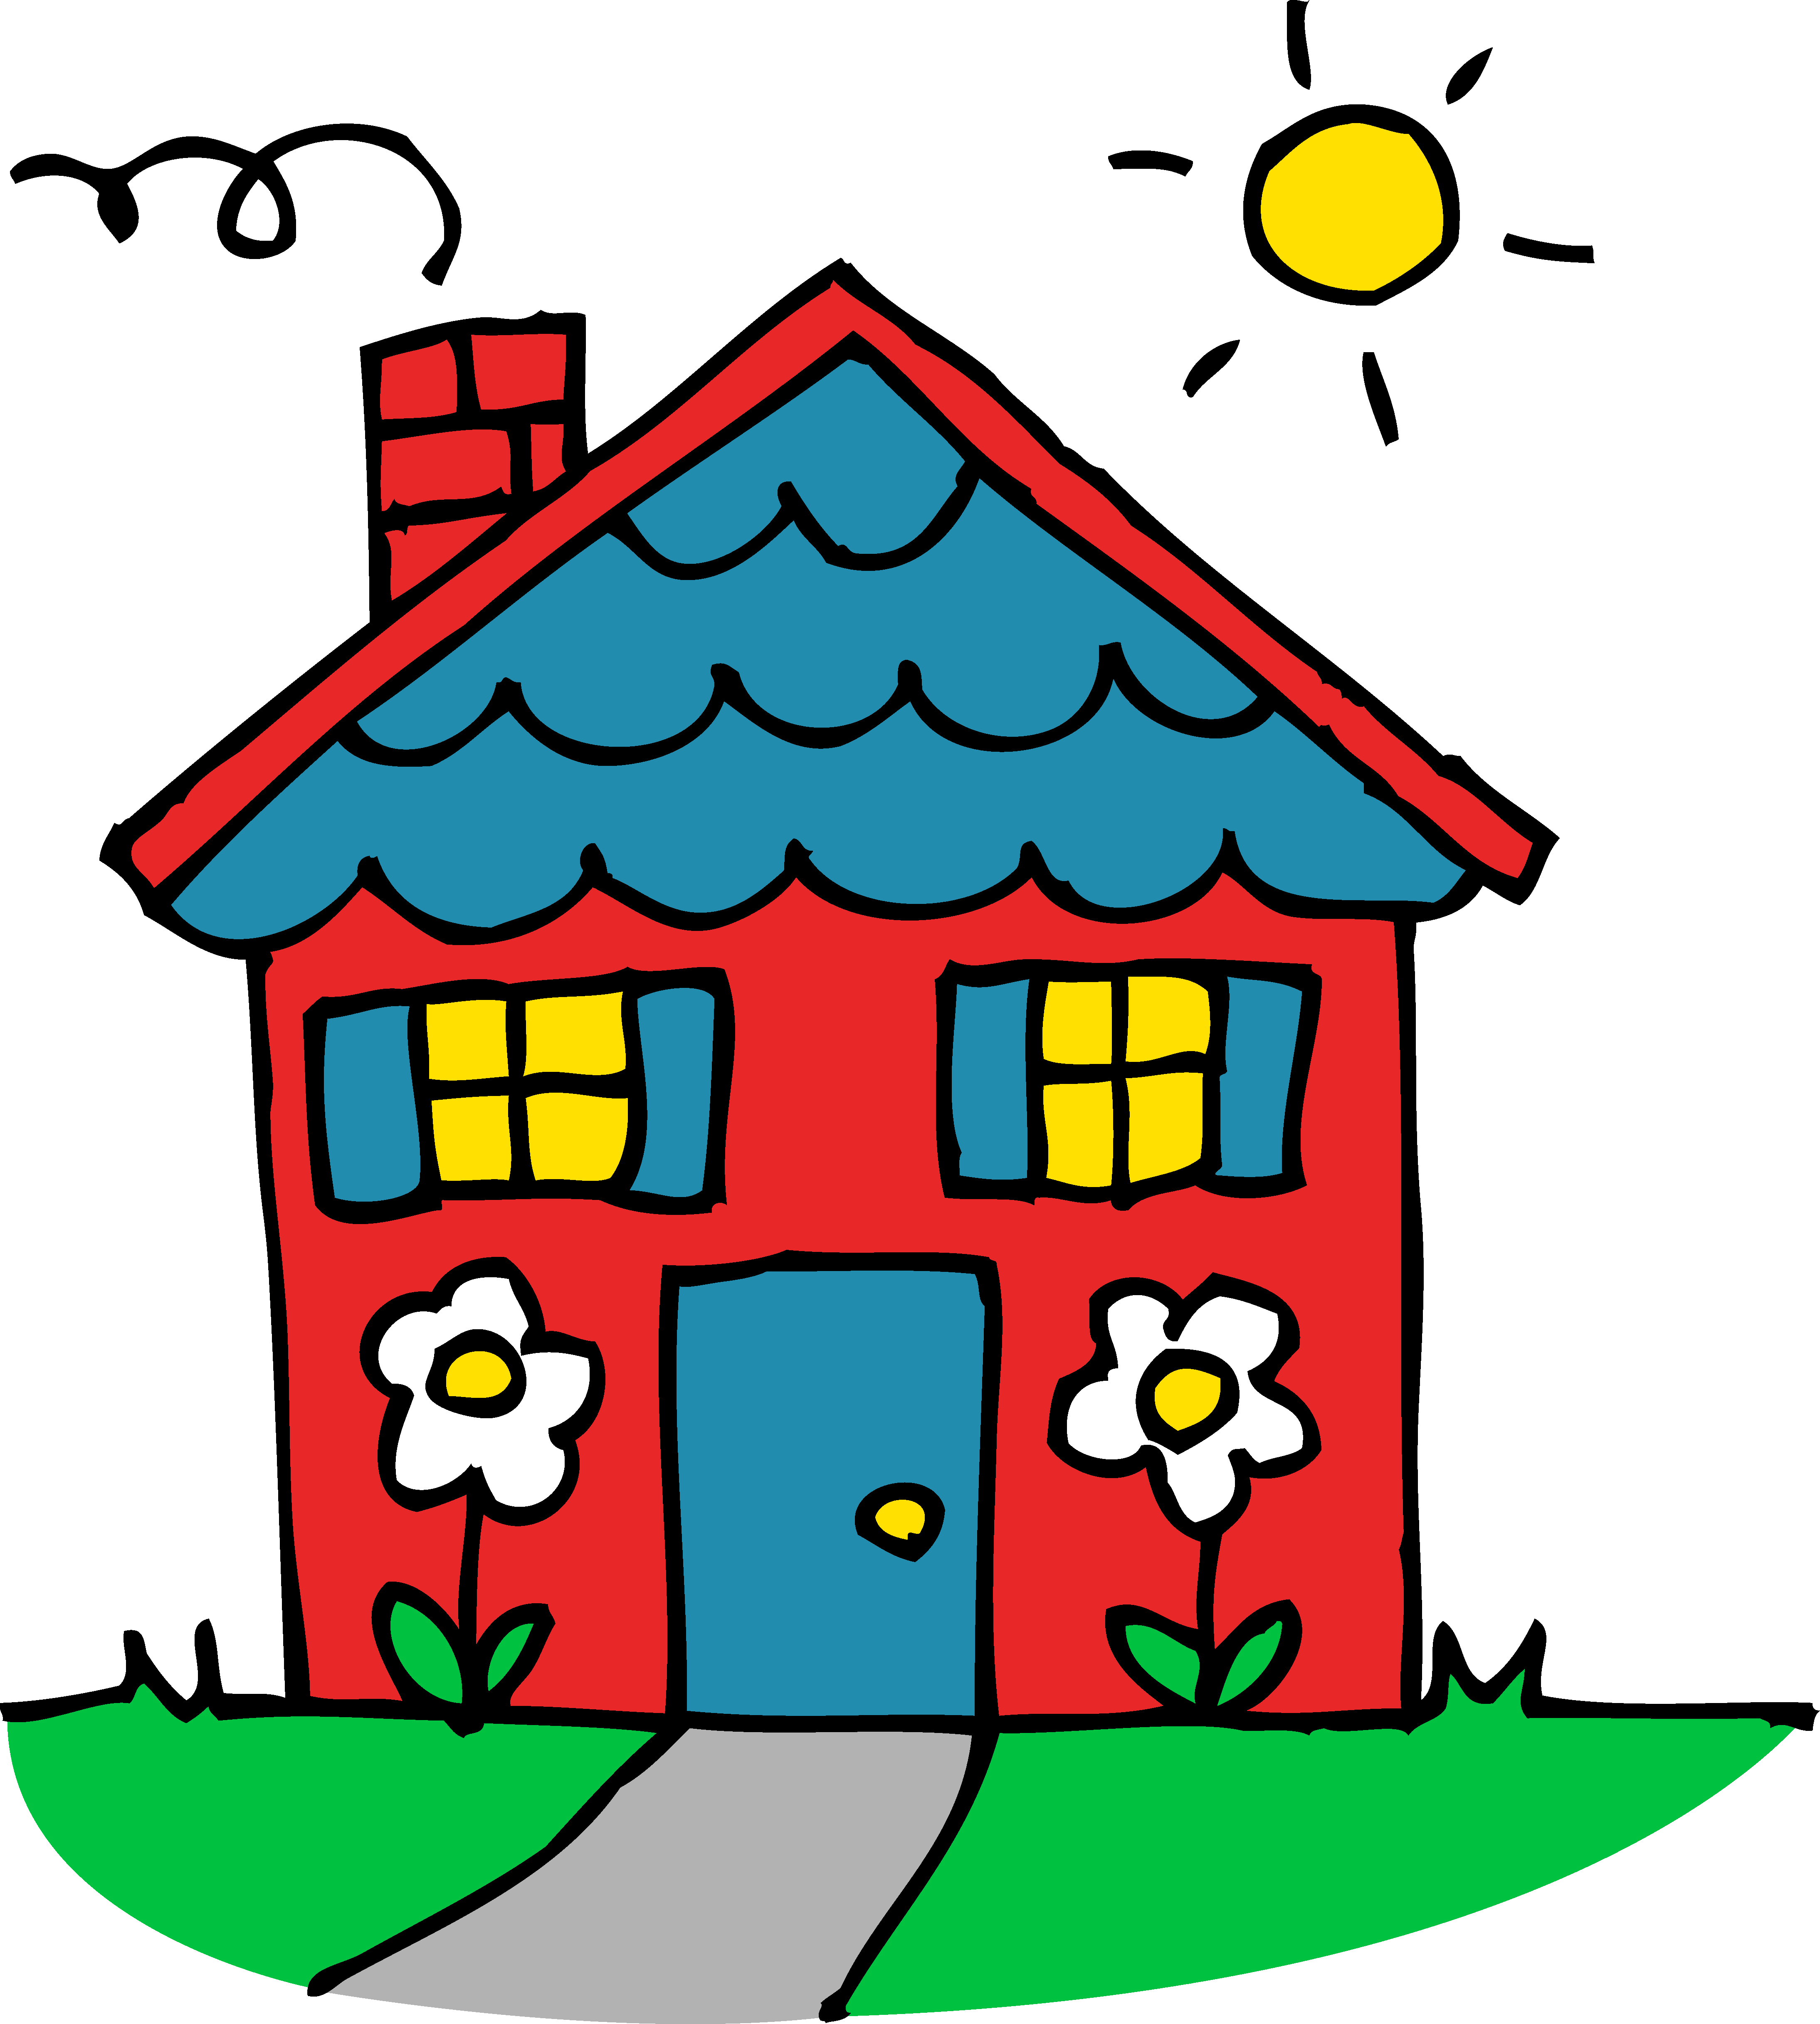 house clipart - Clipart Of A House